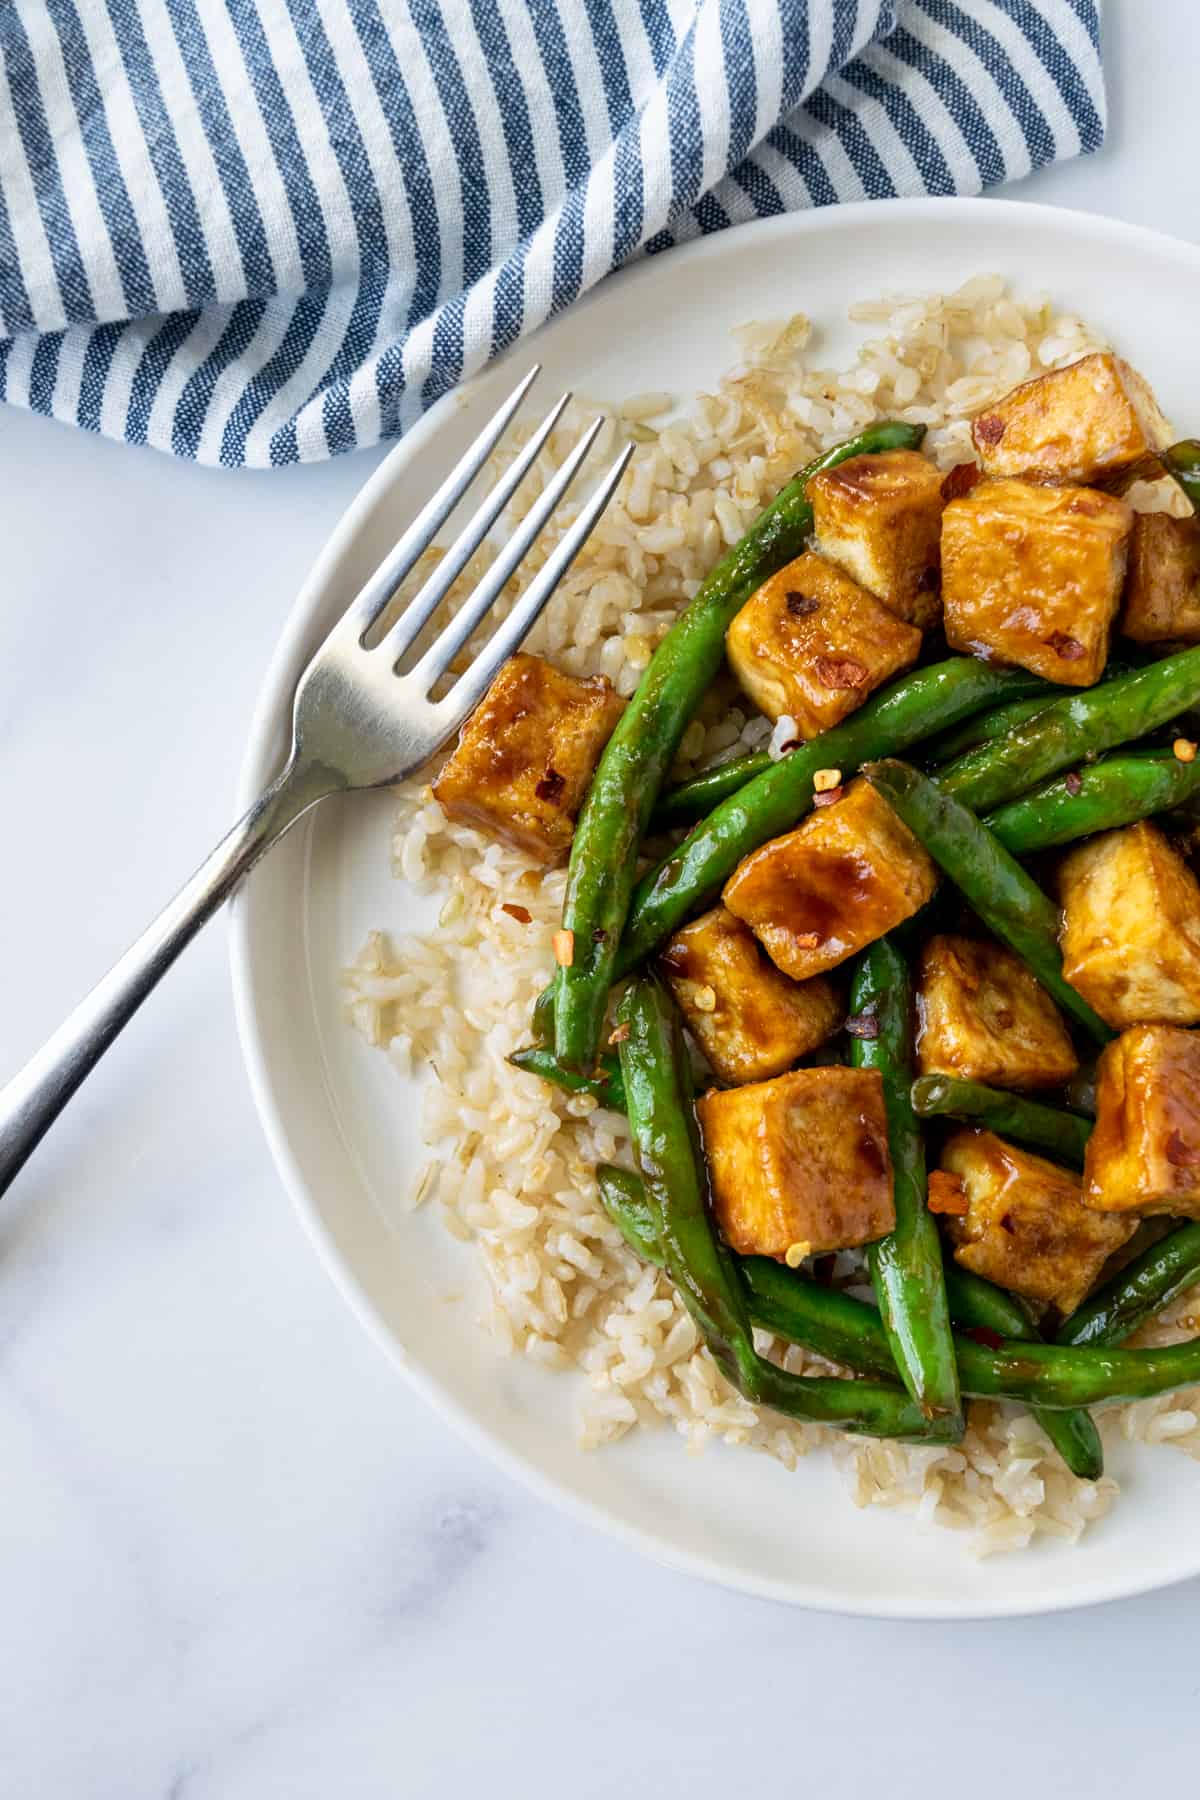 Teriyaki Tofu Stir Fry with Green Beans on a white plate on a table with a blue and white striped linen.